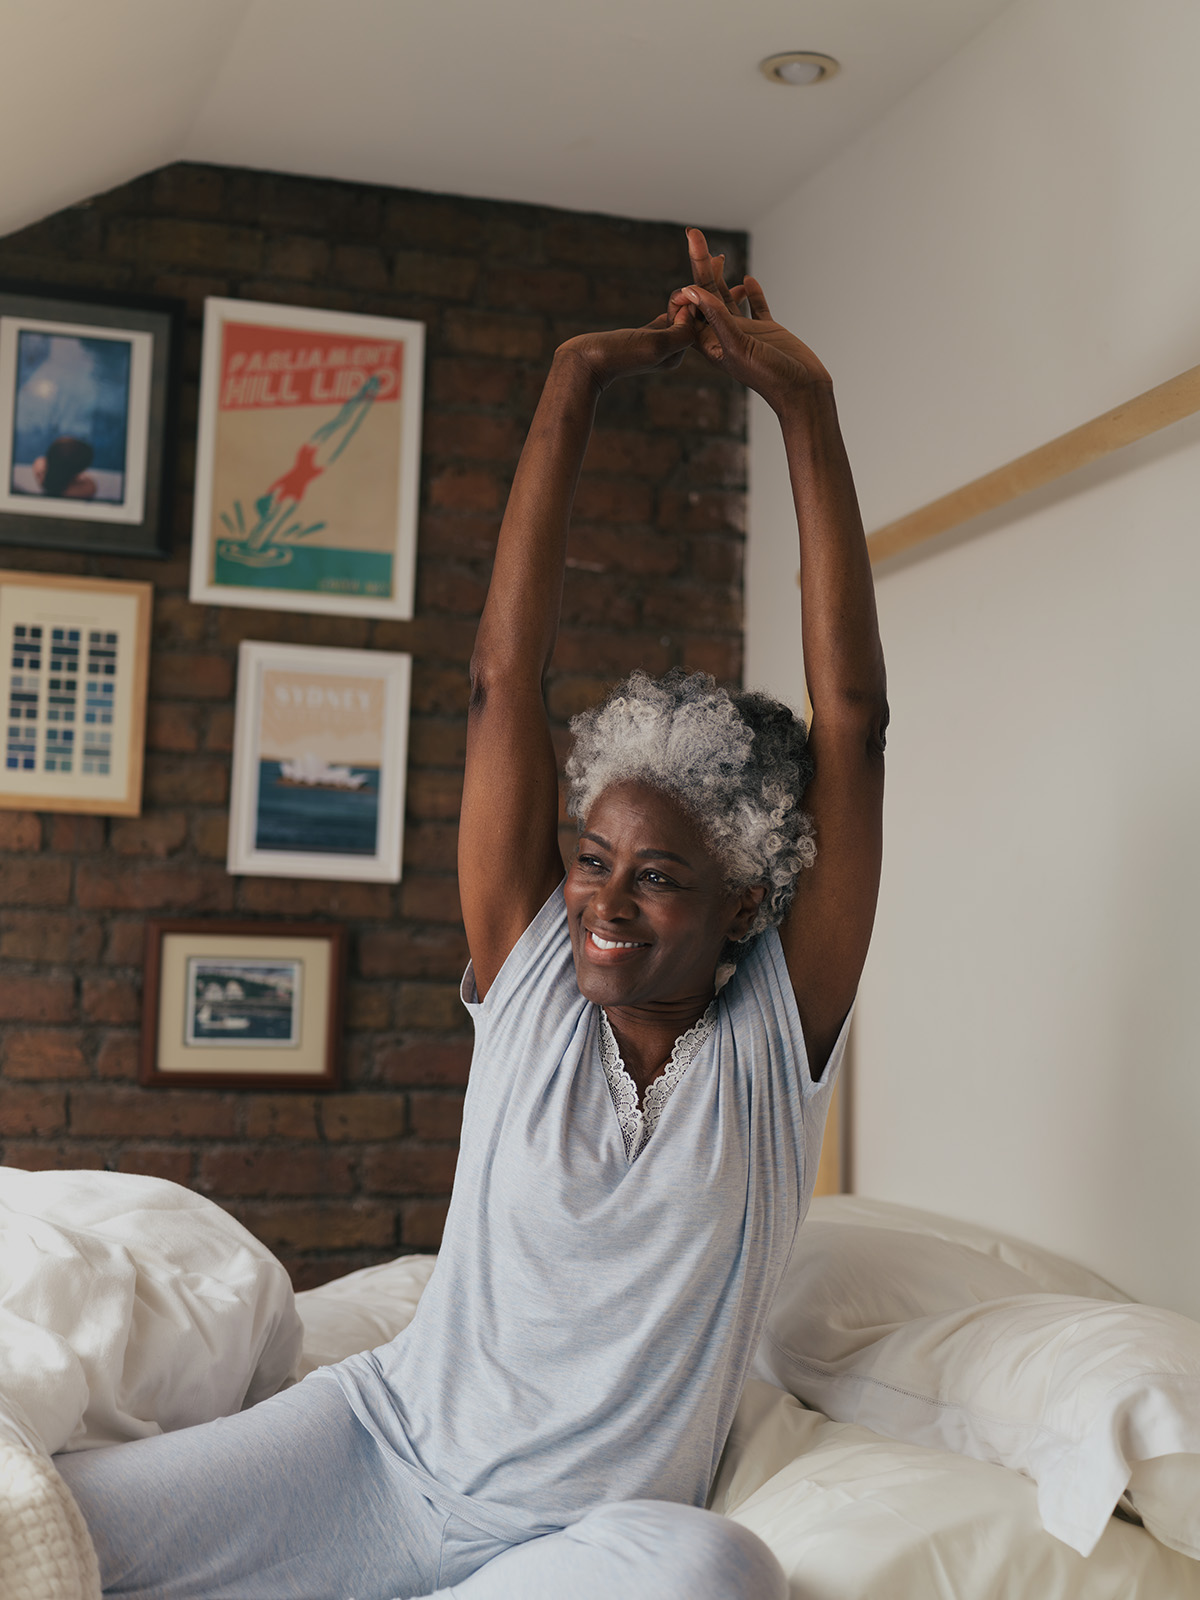 At Primasun, we believe sleep is the foundation of health. It restores our bodies, energizes our days, and enriches our communities. When we sleep well, we can rediscover the world through rested eyes and achieve a better quality of life.